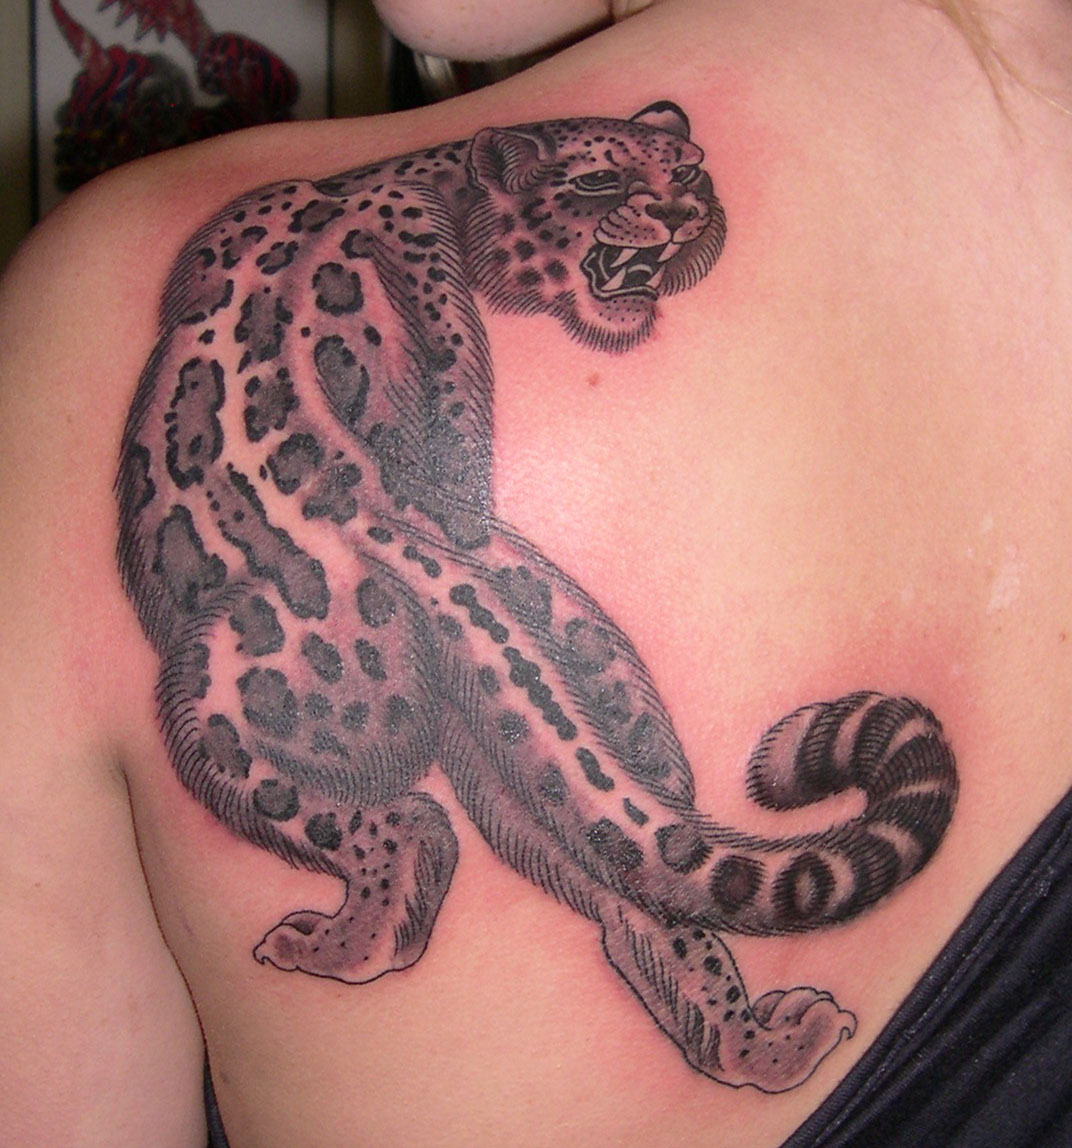 Leopard Tattoos Designs Ideas and Meaning Tattoos For You